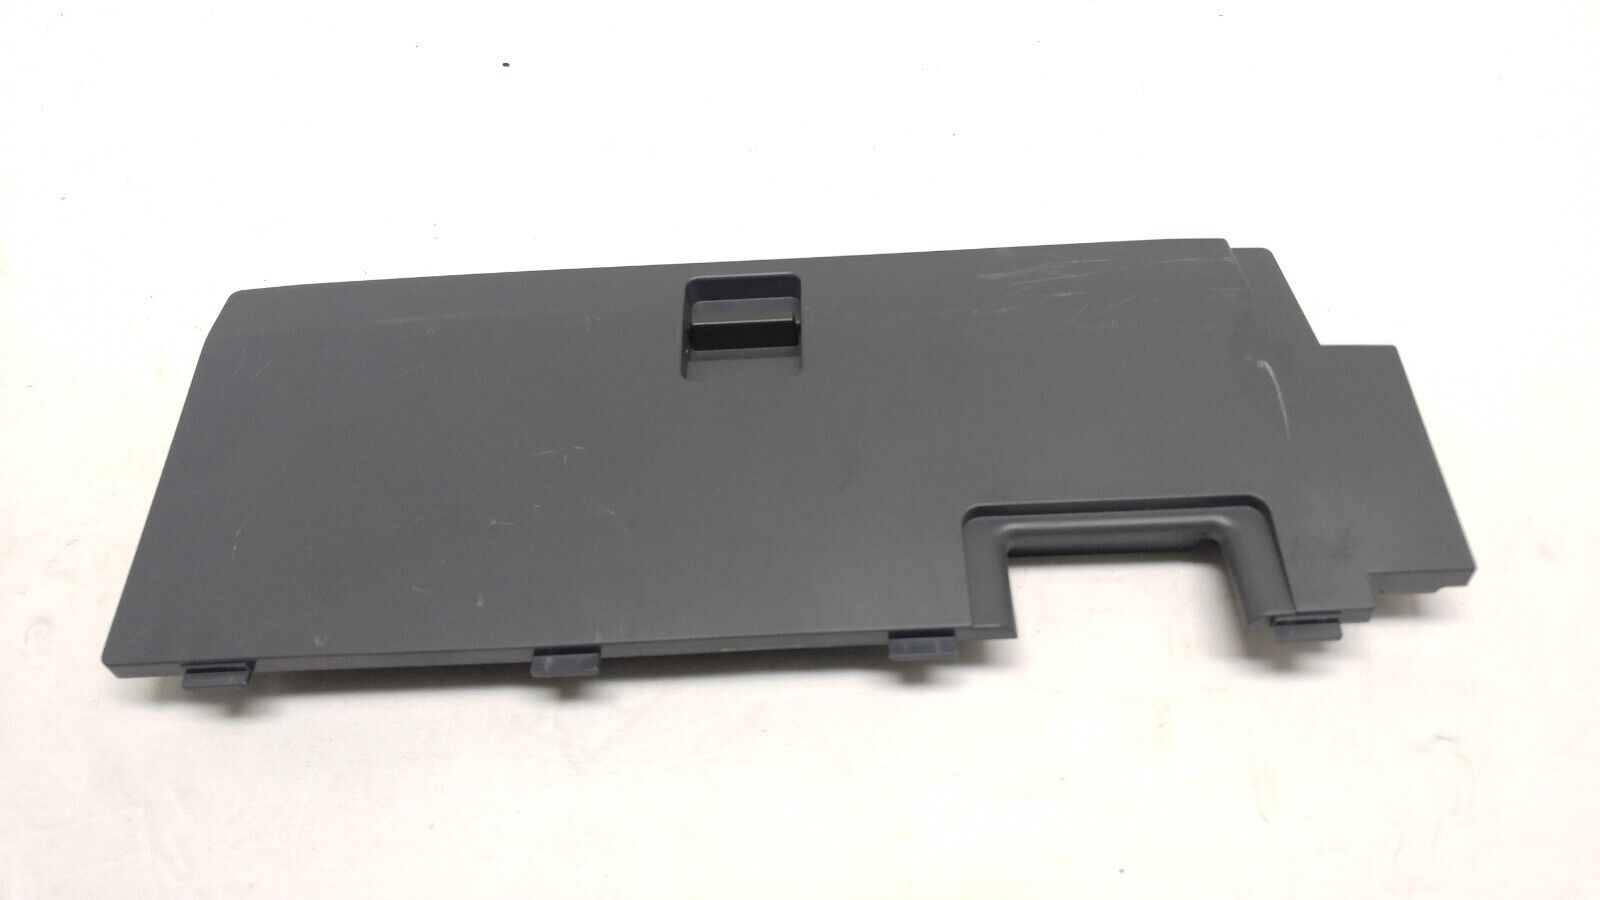 Canon Rear / paper jam panel for i860 printers.